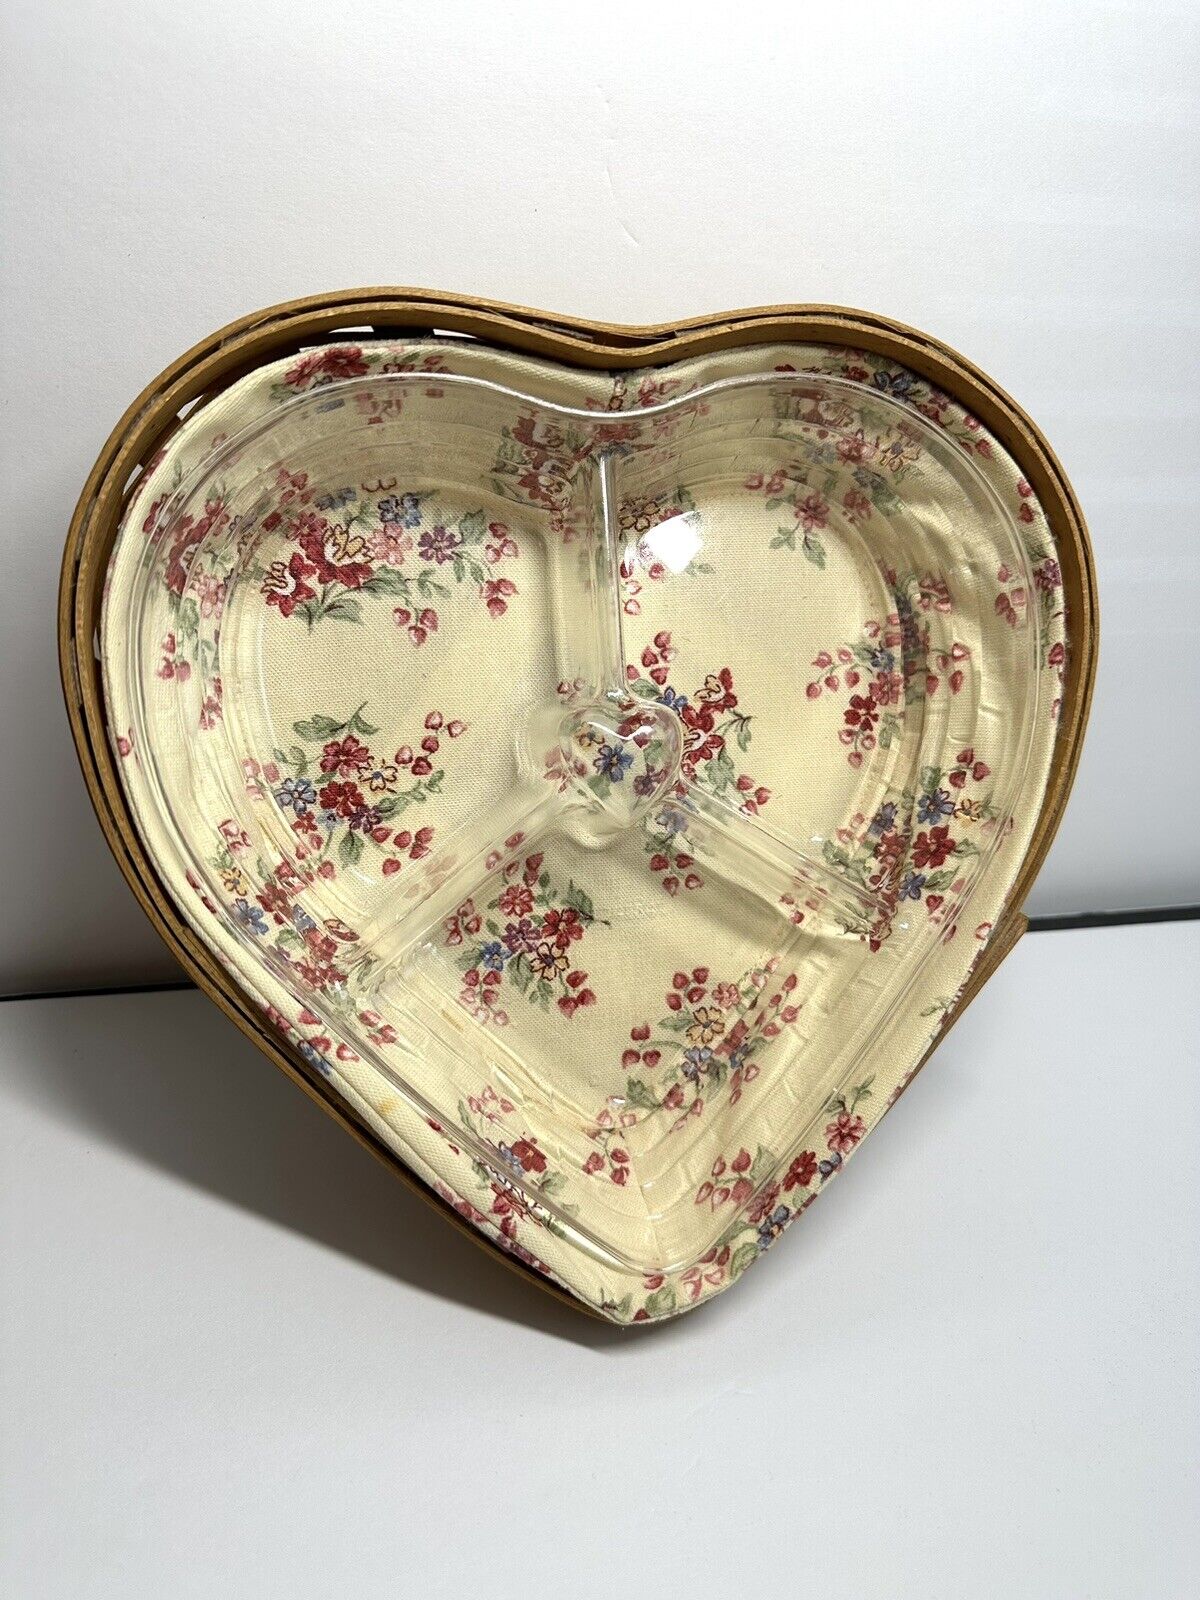 LONGABERGER 2004 Sweetest Heart Basket With Liner And Divided Protector 8.5” W